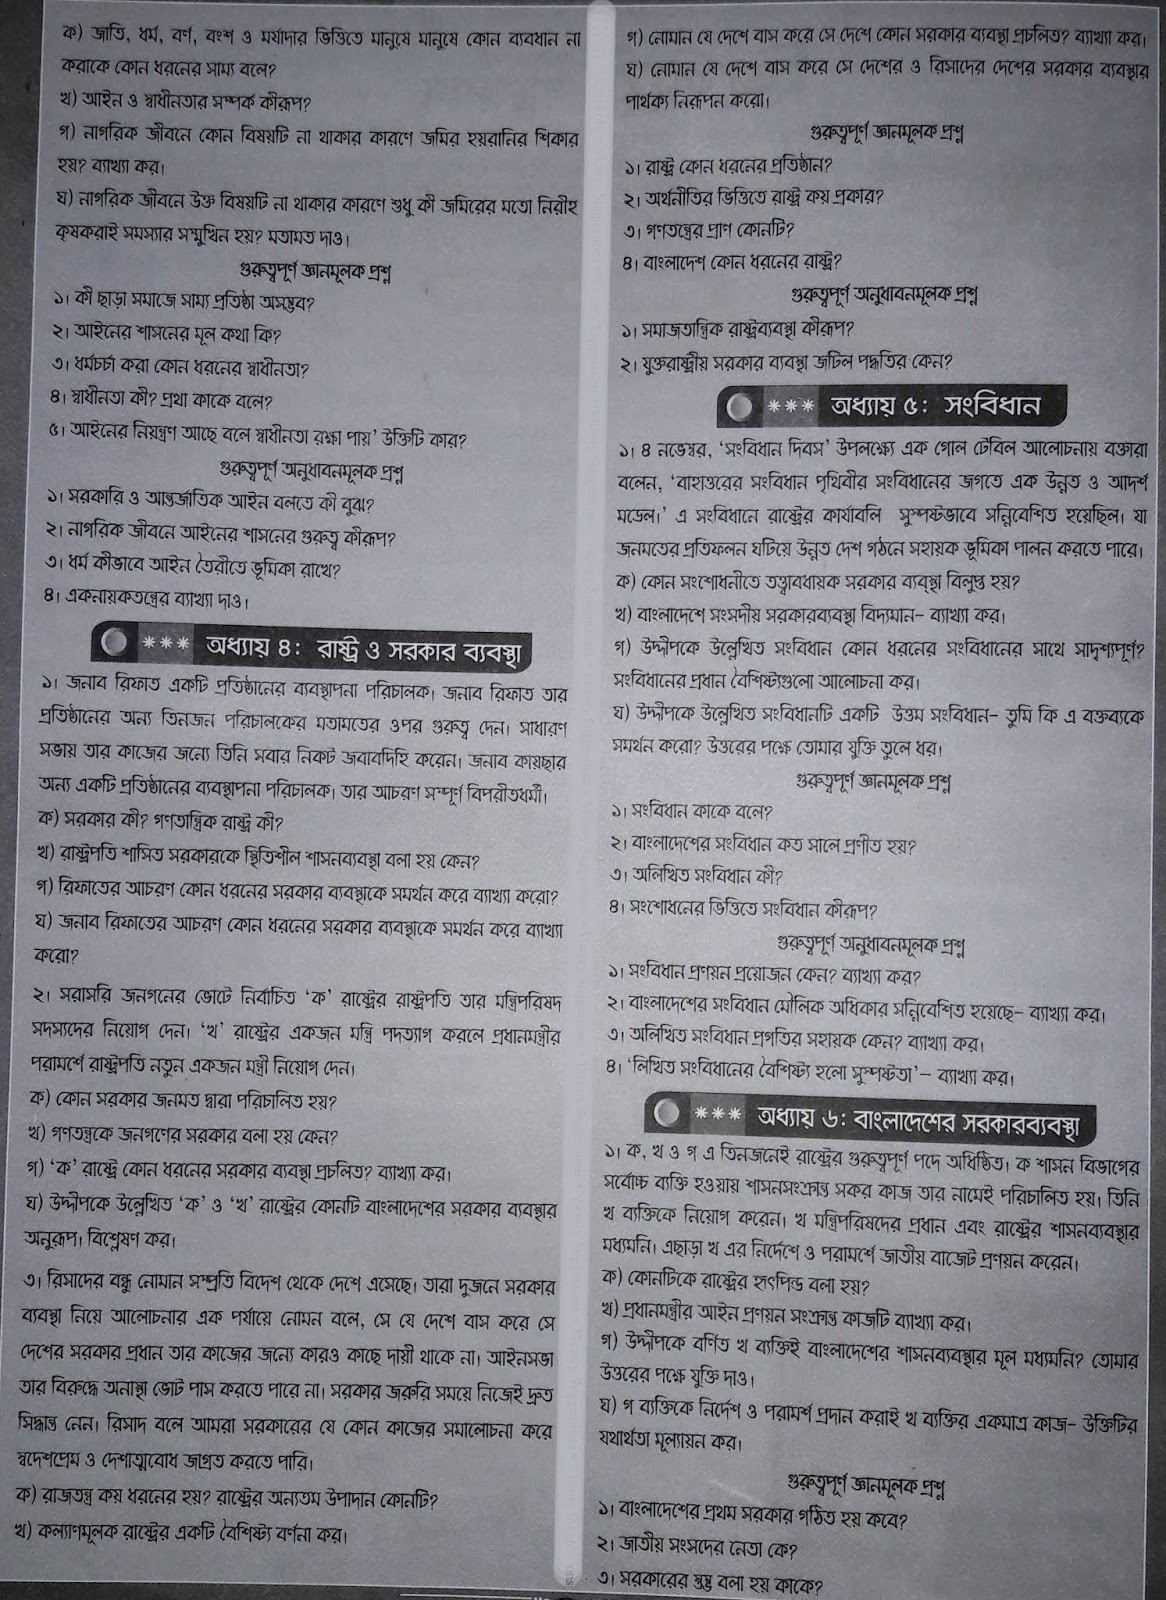 SSC Civics suggestion, question paper, model question, mcq question, question pattern, syllabus for dhaka board, all boards